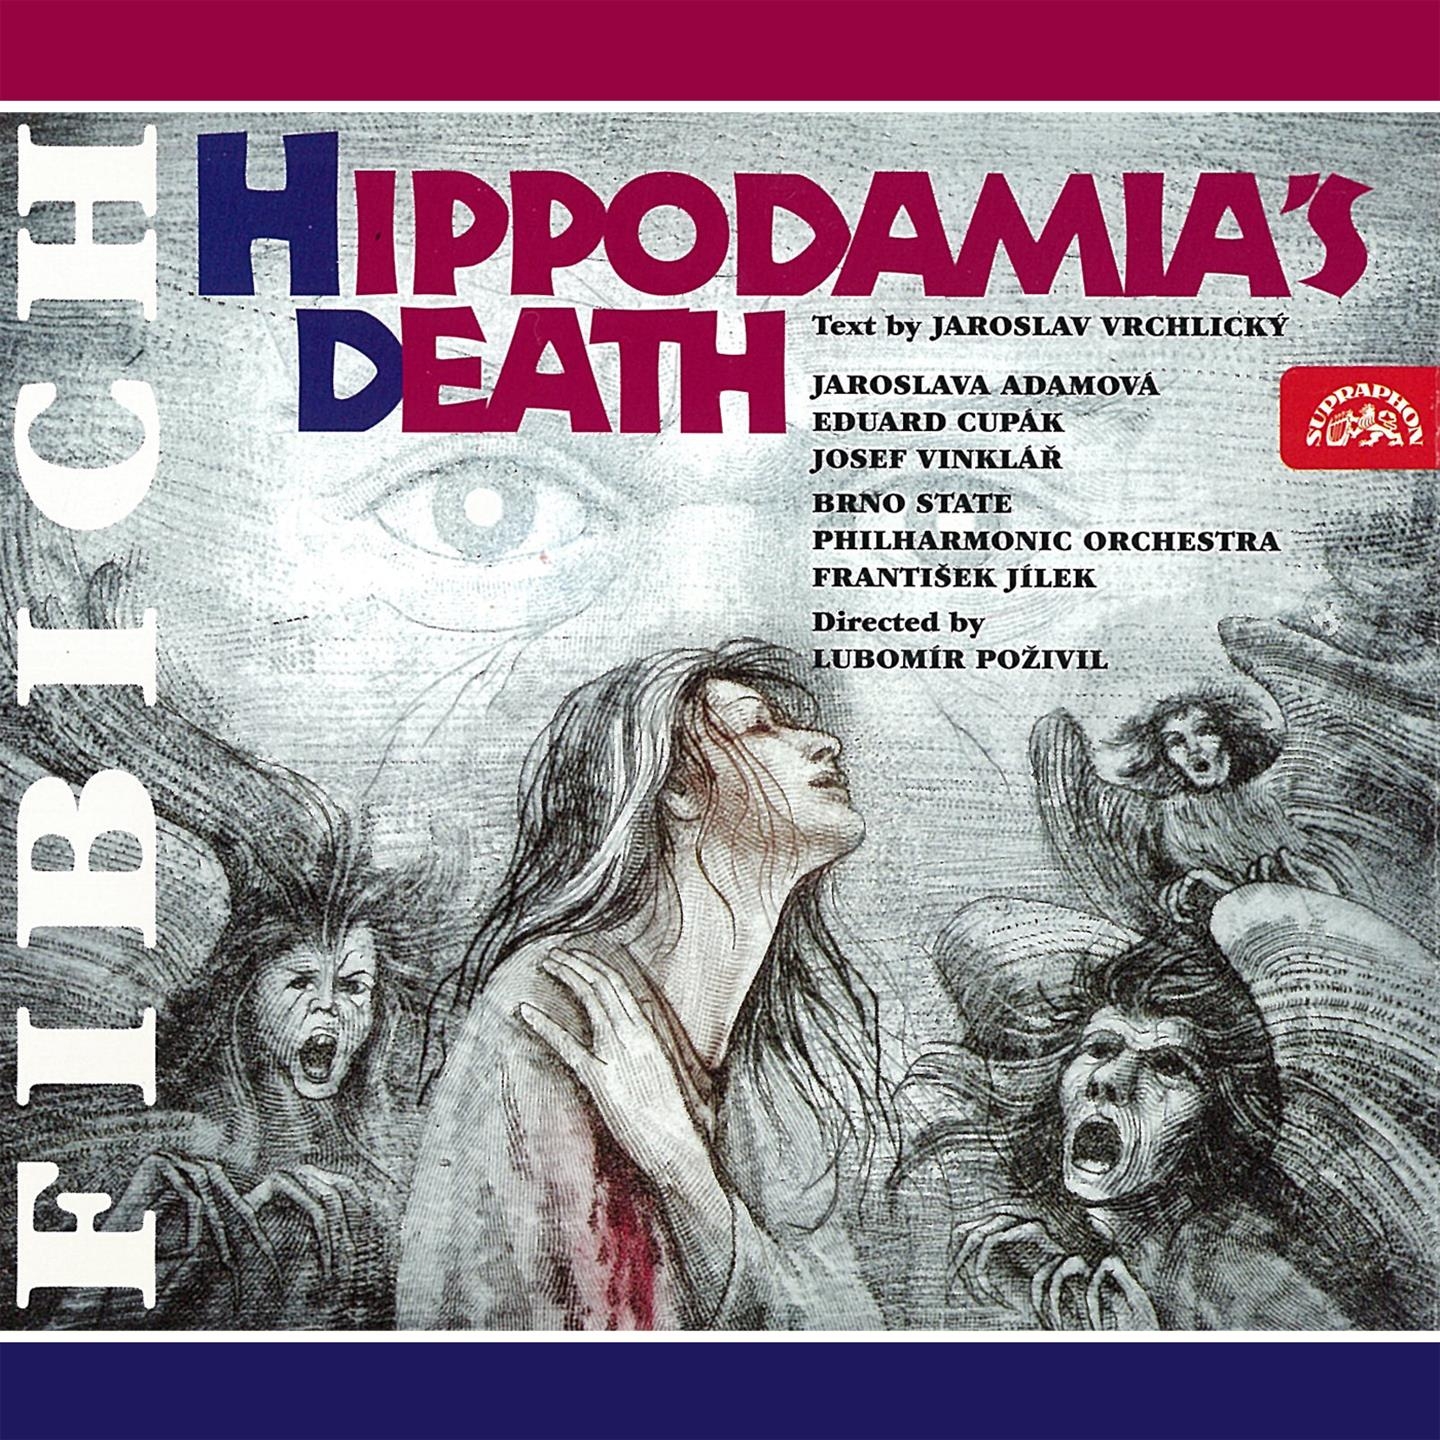 Hippodamia s Death, Op. 33, .: Act 1, Scene 1: Why Did You Summon Us, Mother?